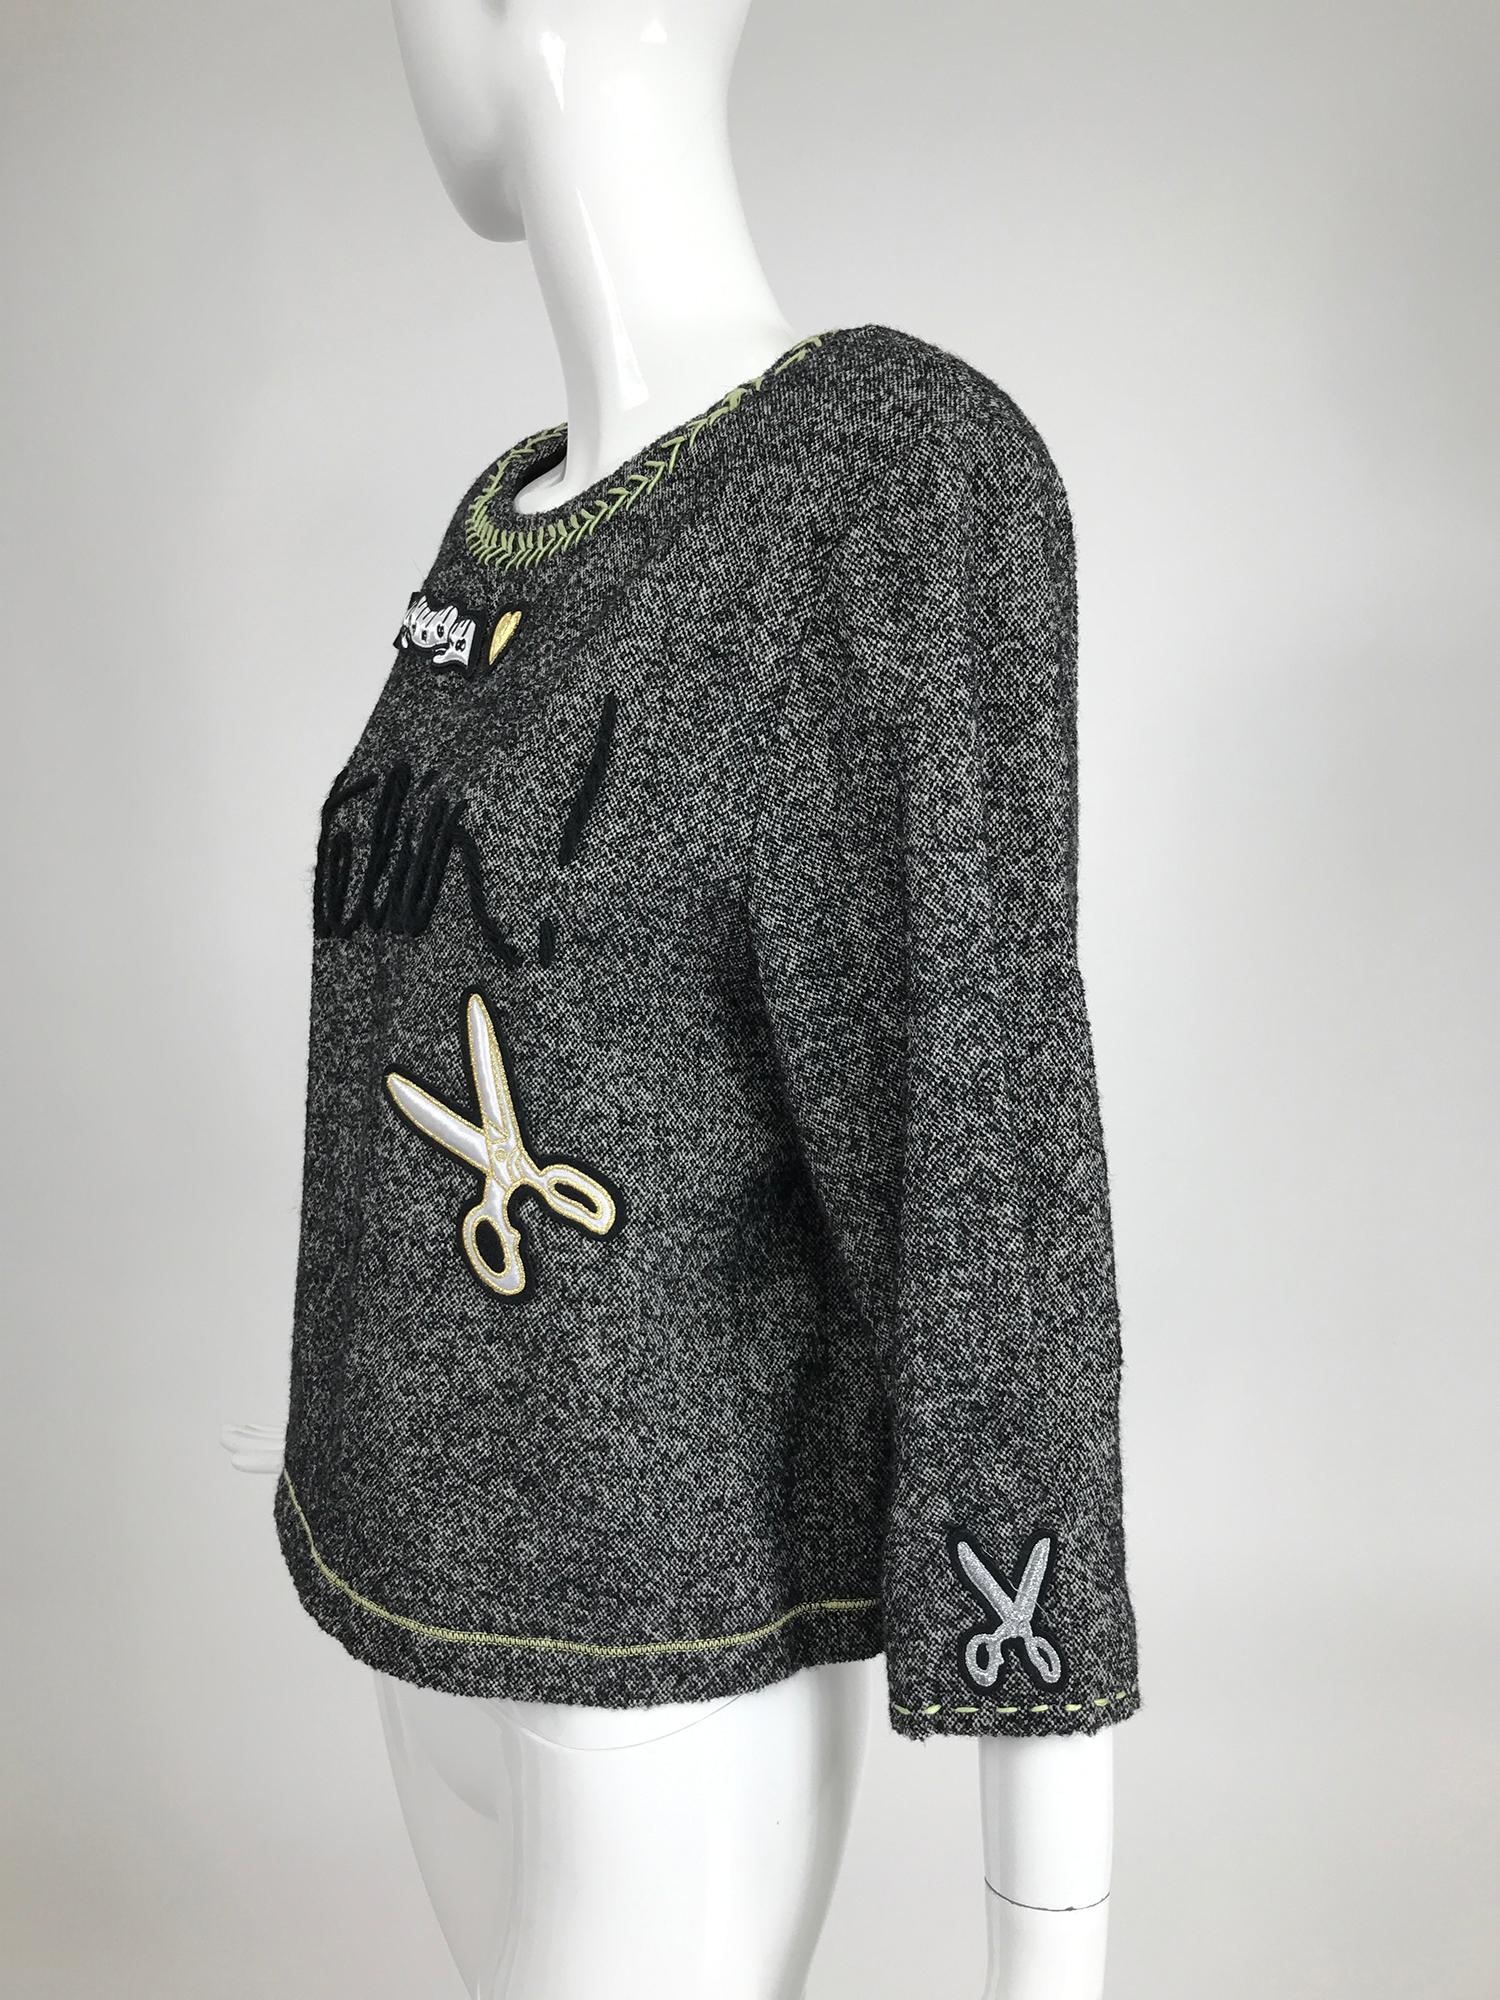 Moschino Cheap & Chic Atelier! Tweed Applique Top 3